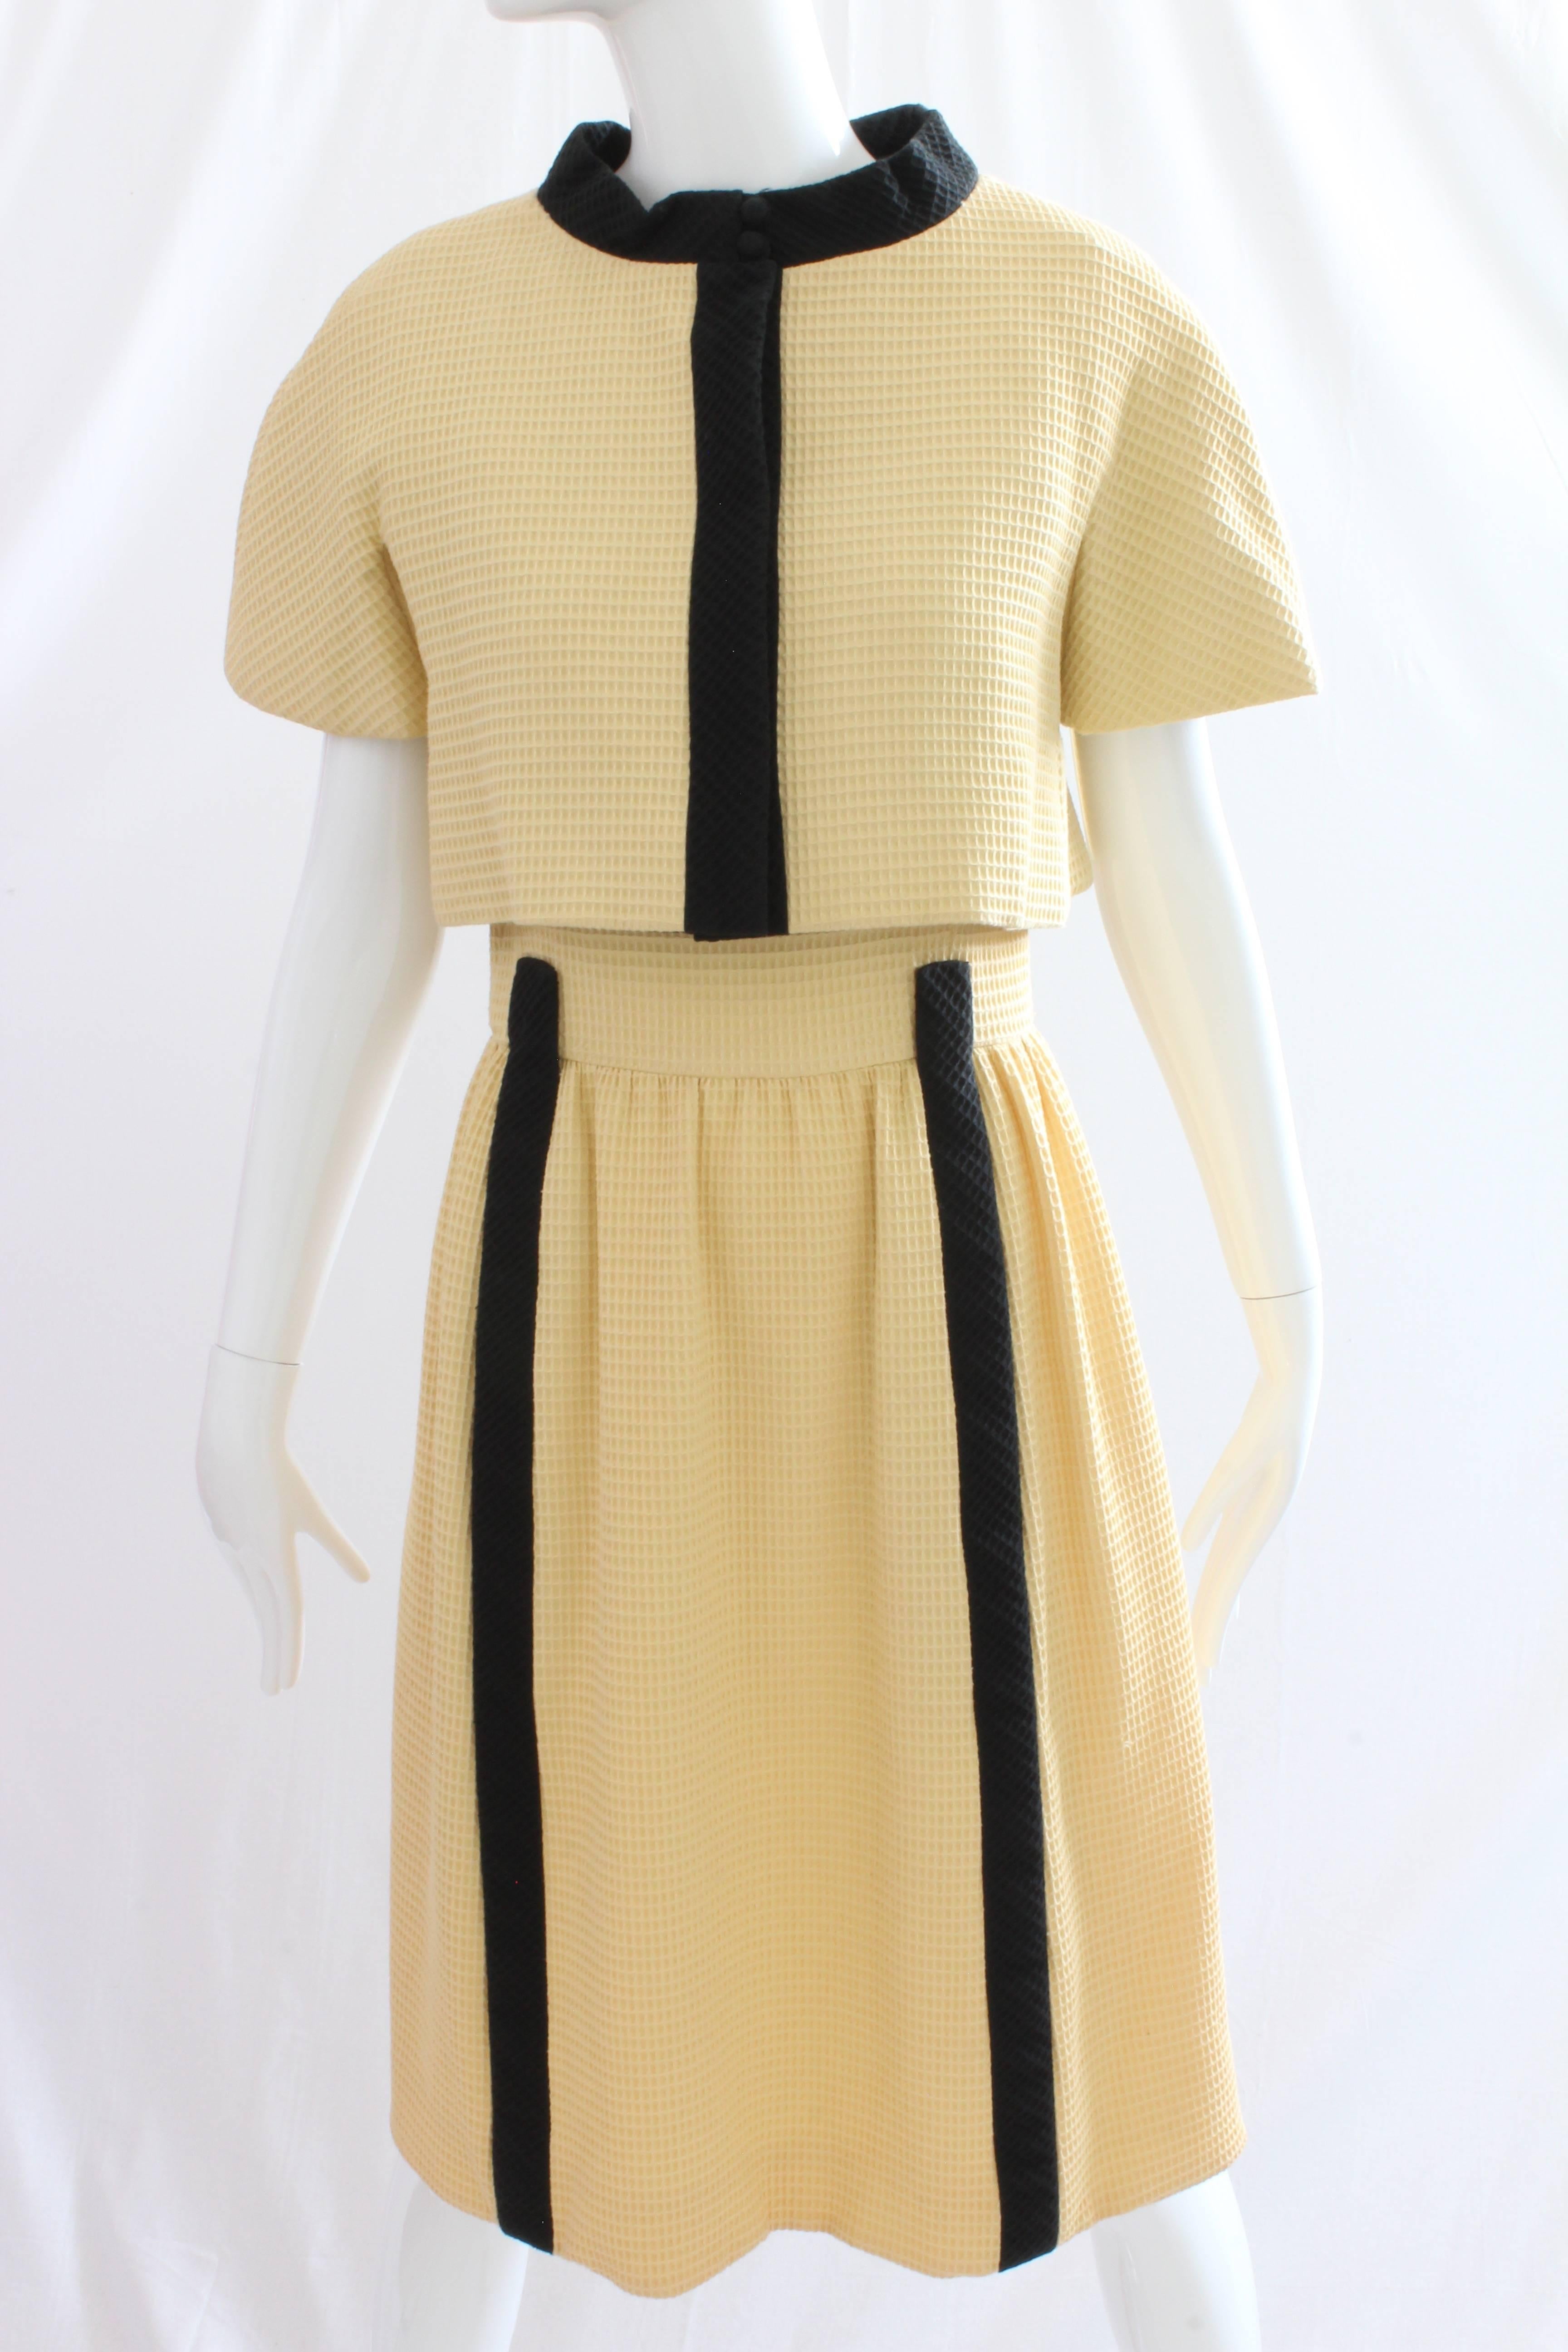 Here's a pretty 2pc dress set from Chester Weinberg, who once declared, 